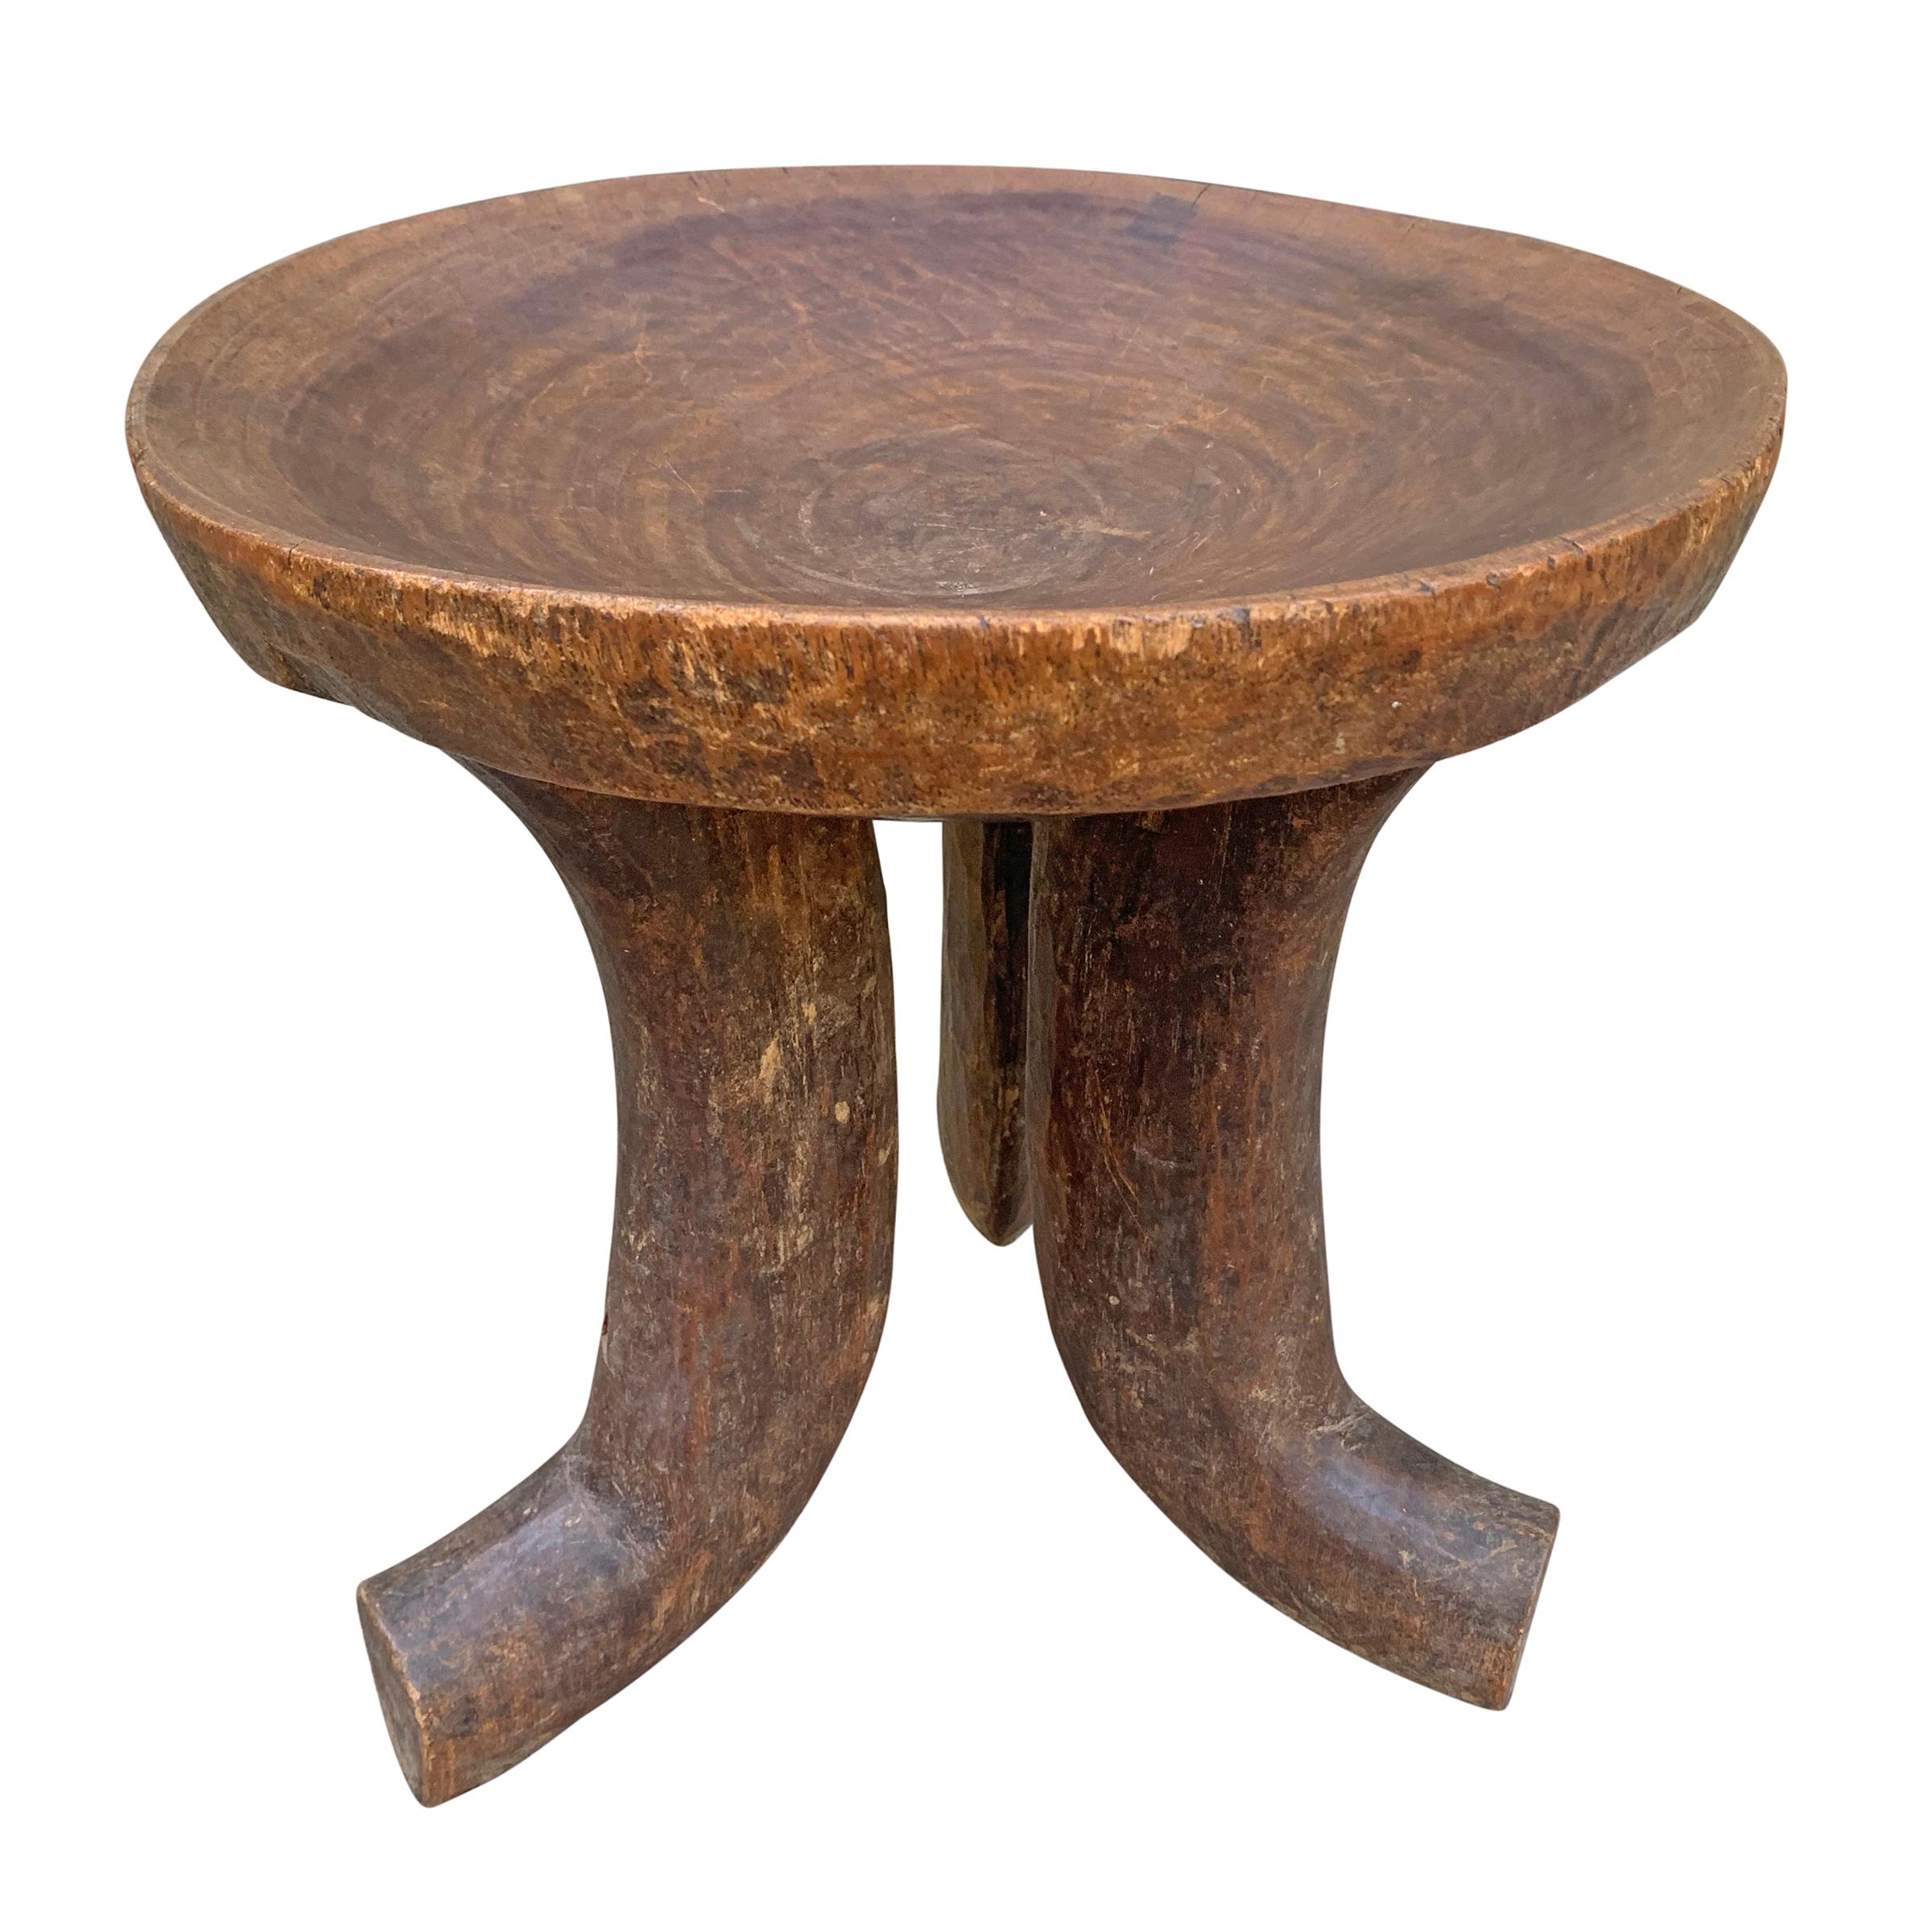 A wonderfully sculptural early 20th century Ethiopian stool carved of one piece of wood showing a hand carved texture, with three curved legs supporting a convex bowl-form seat with a beautiful patina.